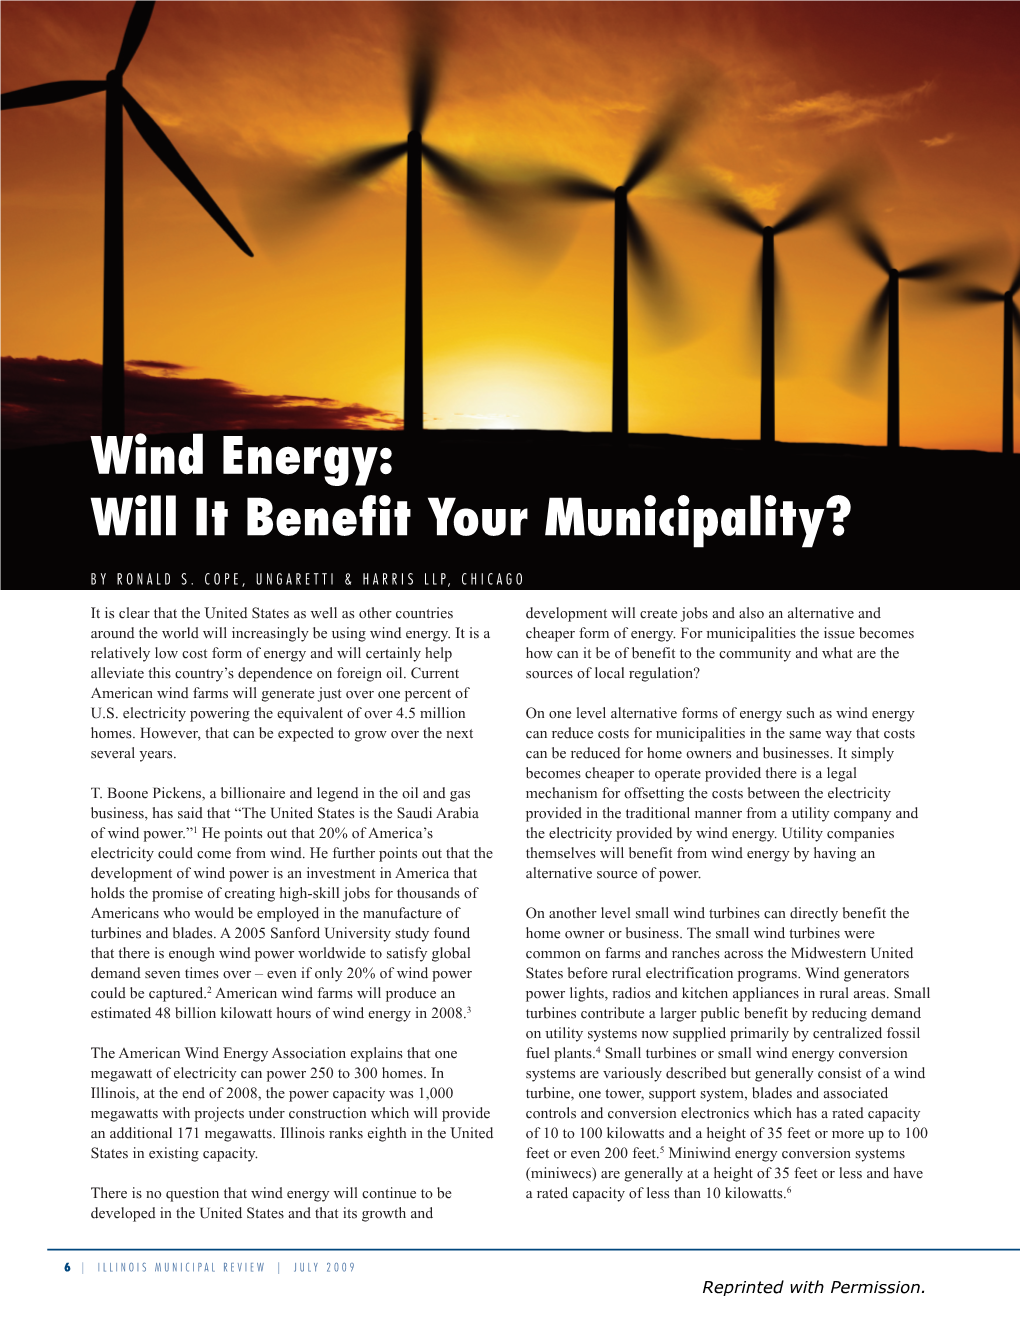 Wind Energy: Will It Benefit Your Municipality?